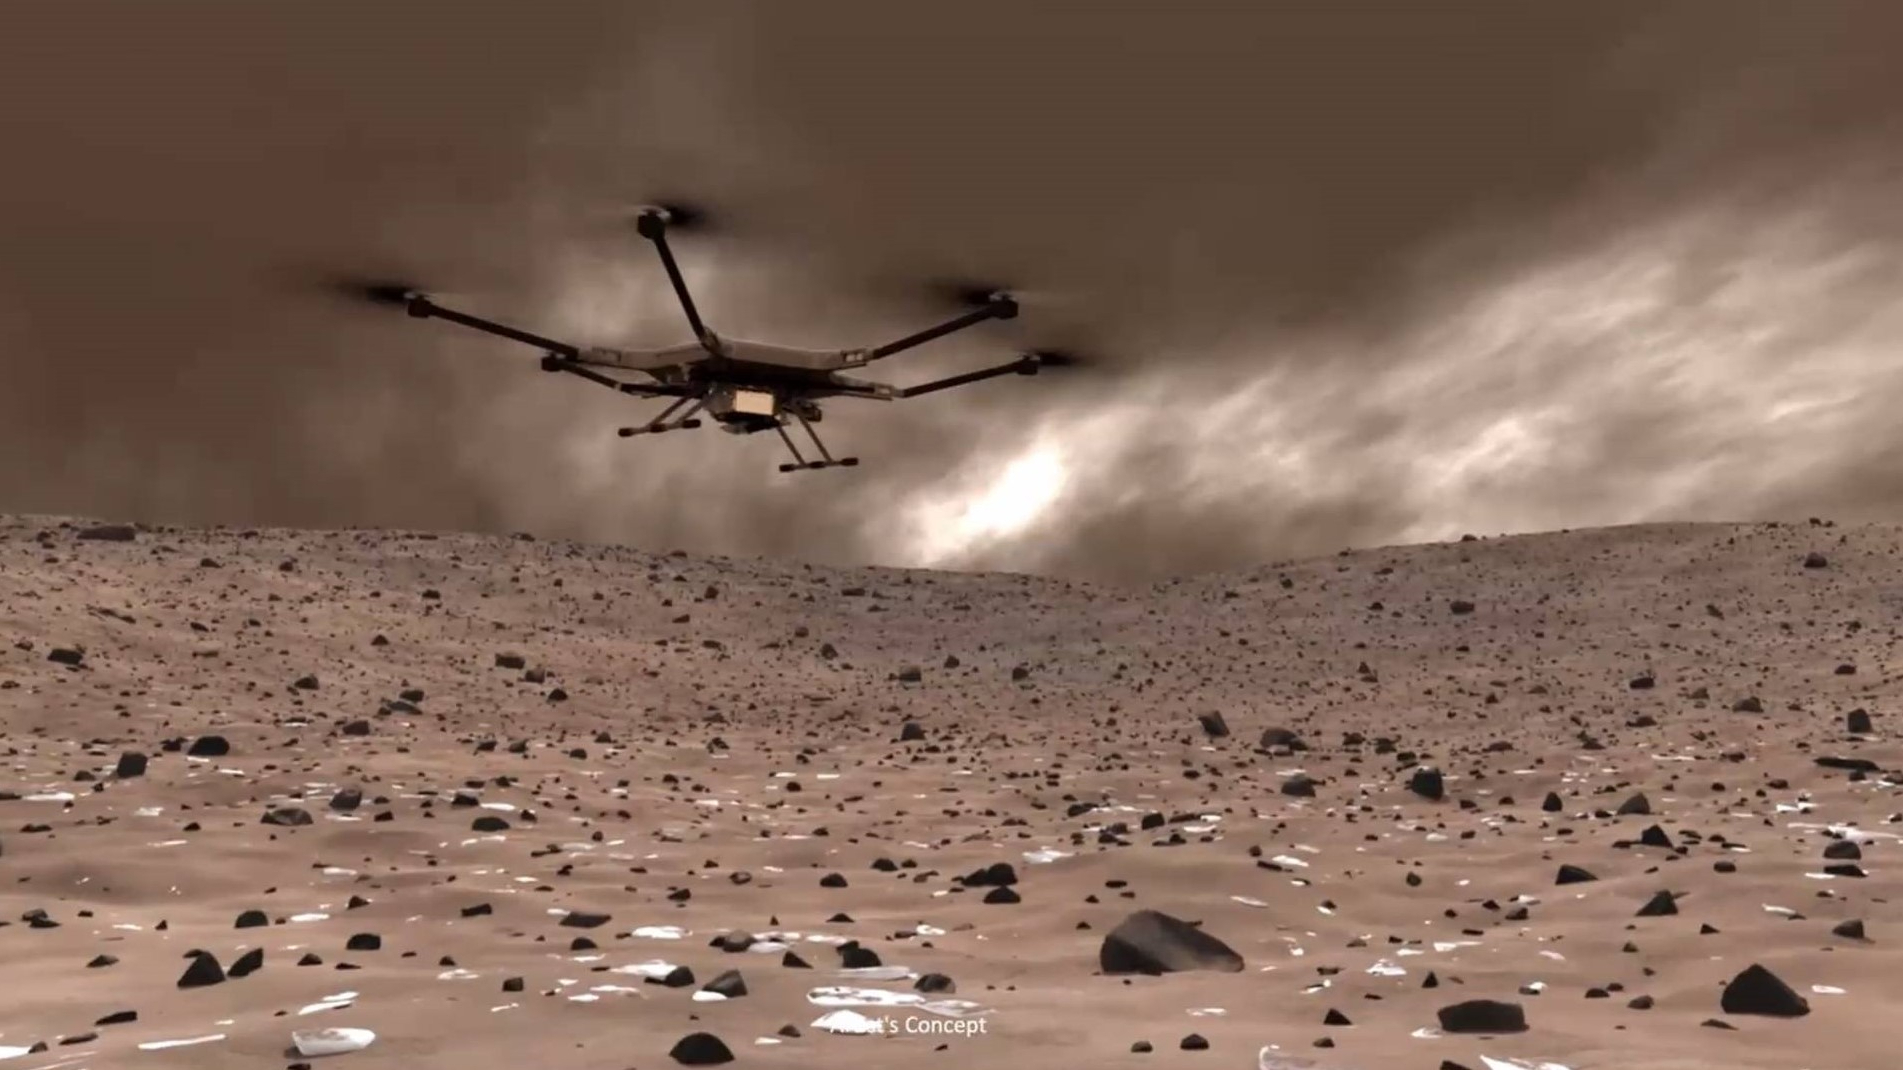 illustration of a large drone flying over a desolate, rocky surface with a cloudy sky above.